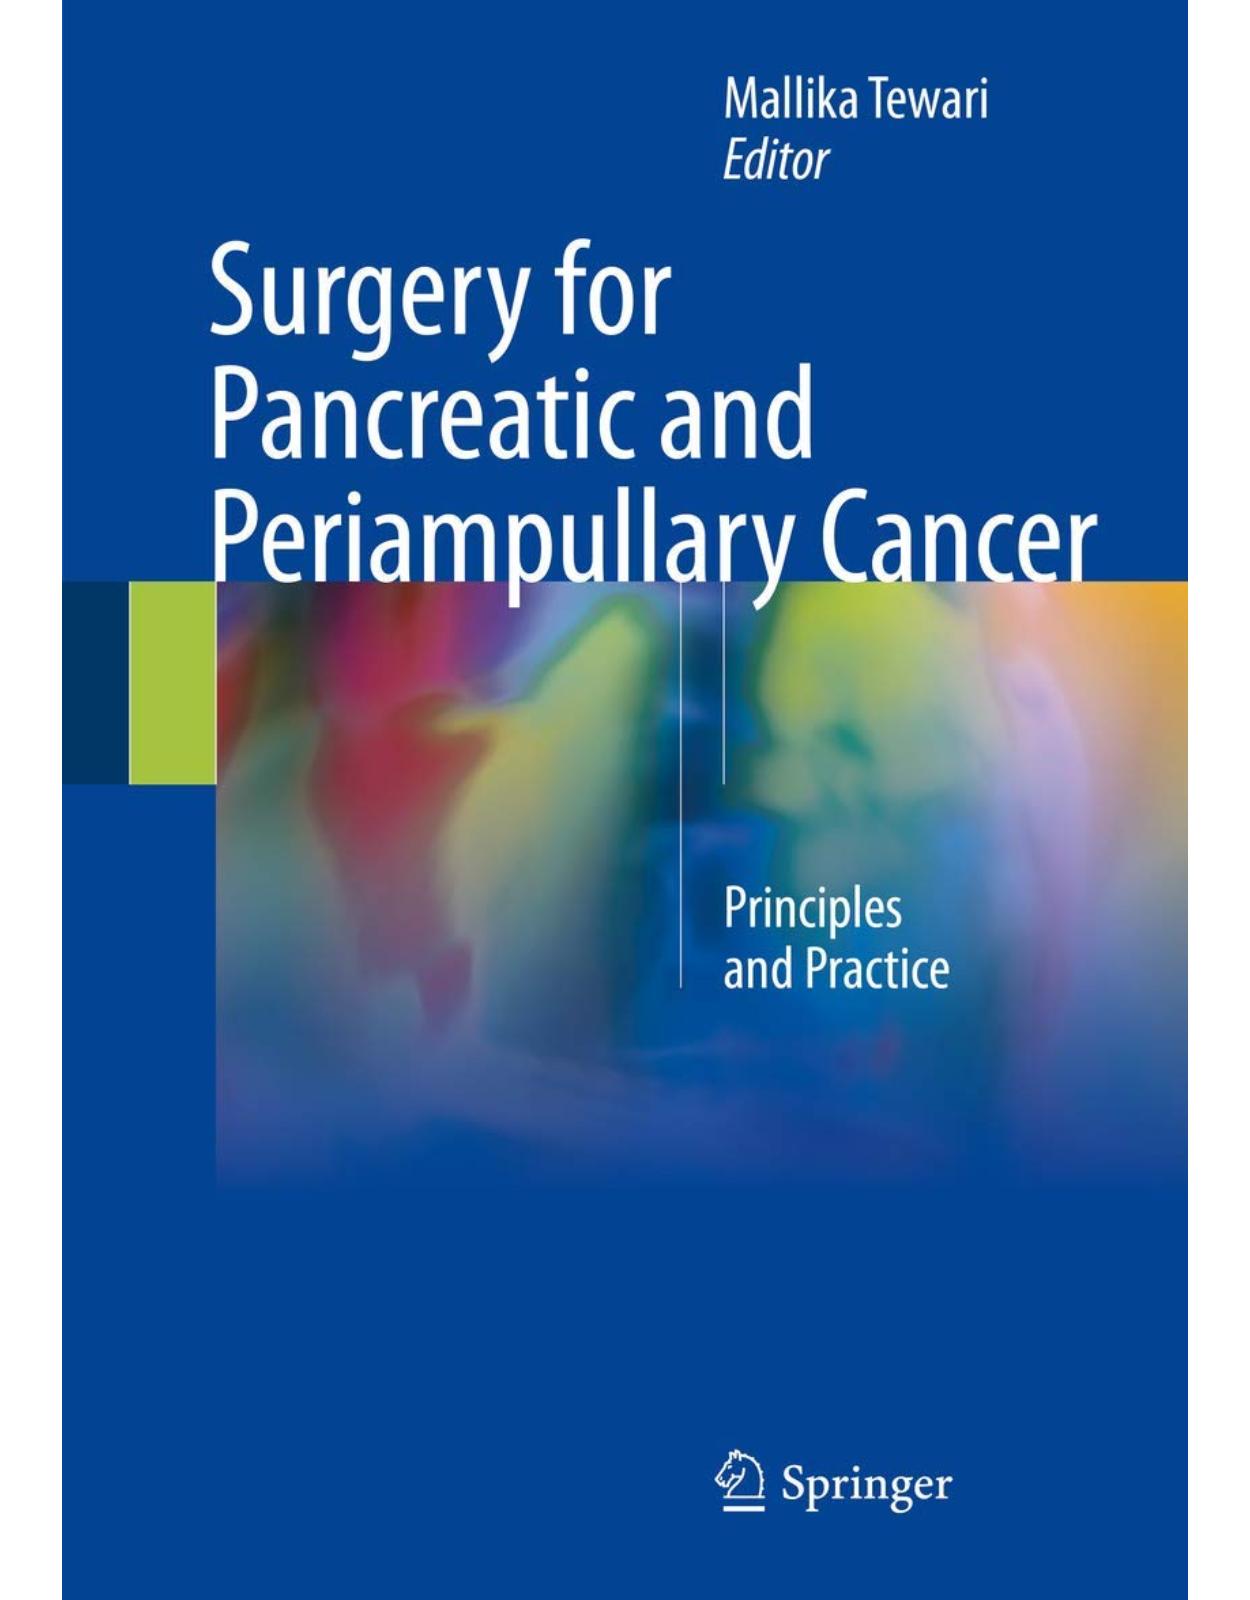 Surgery for Pancreatic and Periampullary Cancer: Principles and Practice